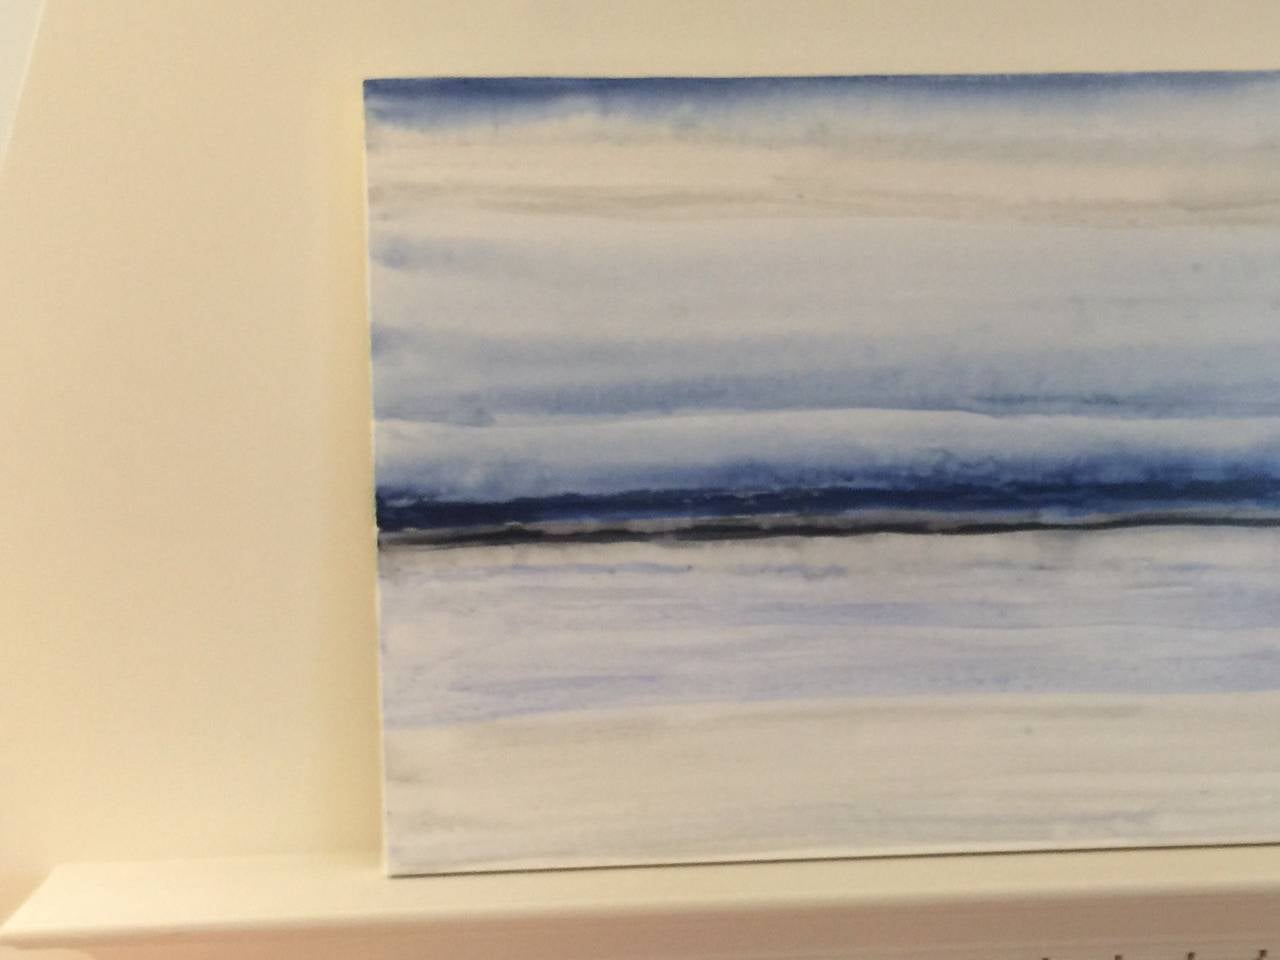 Signed and dated by Raleigh Artist Ellan Maynard, this painting is so titled because of its resemblance to shibori, the art of dying linen with indigo. The serene landscape contains black, indigo, silver, and blues and will be at home in a variety